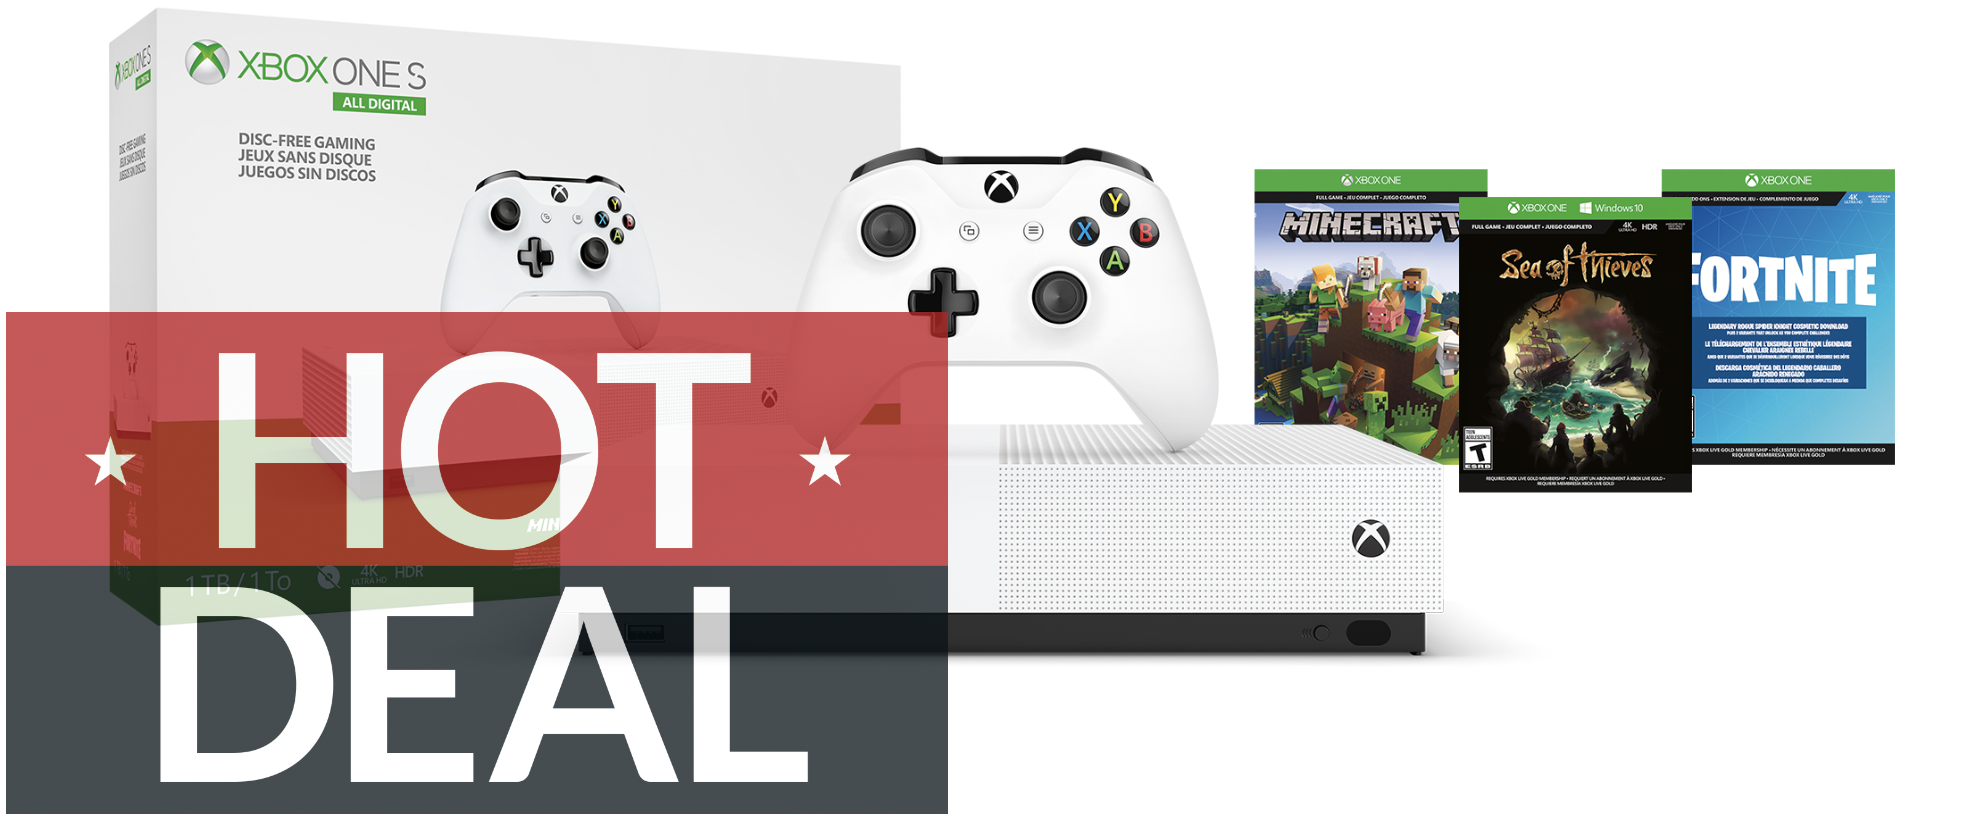 xbox one s for sale at walmart